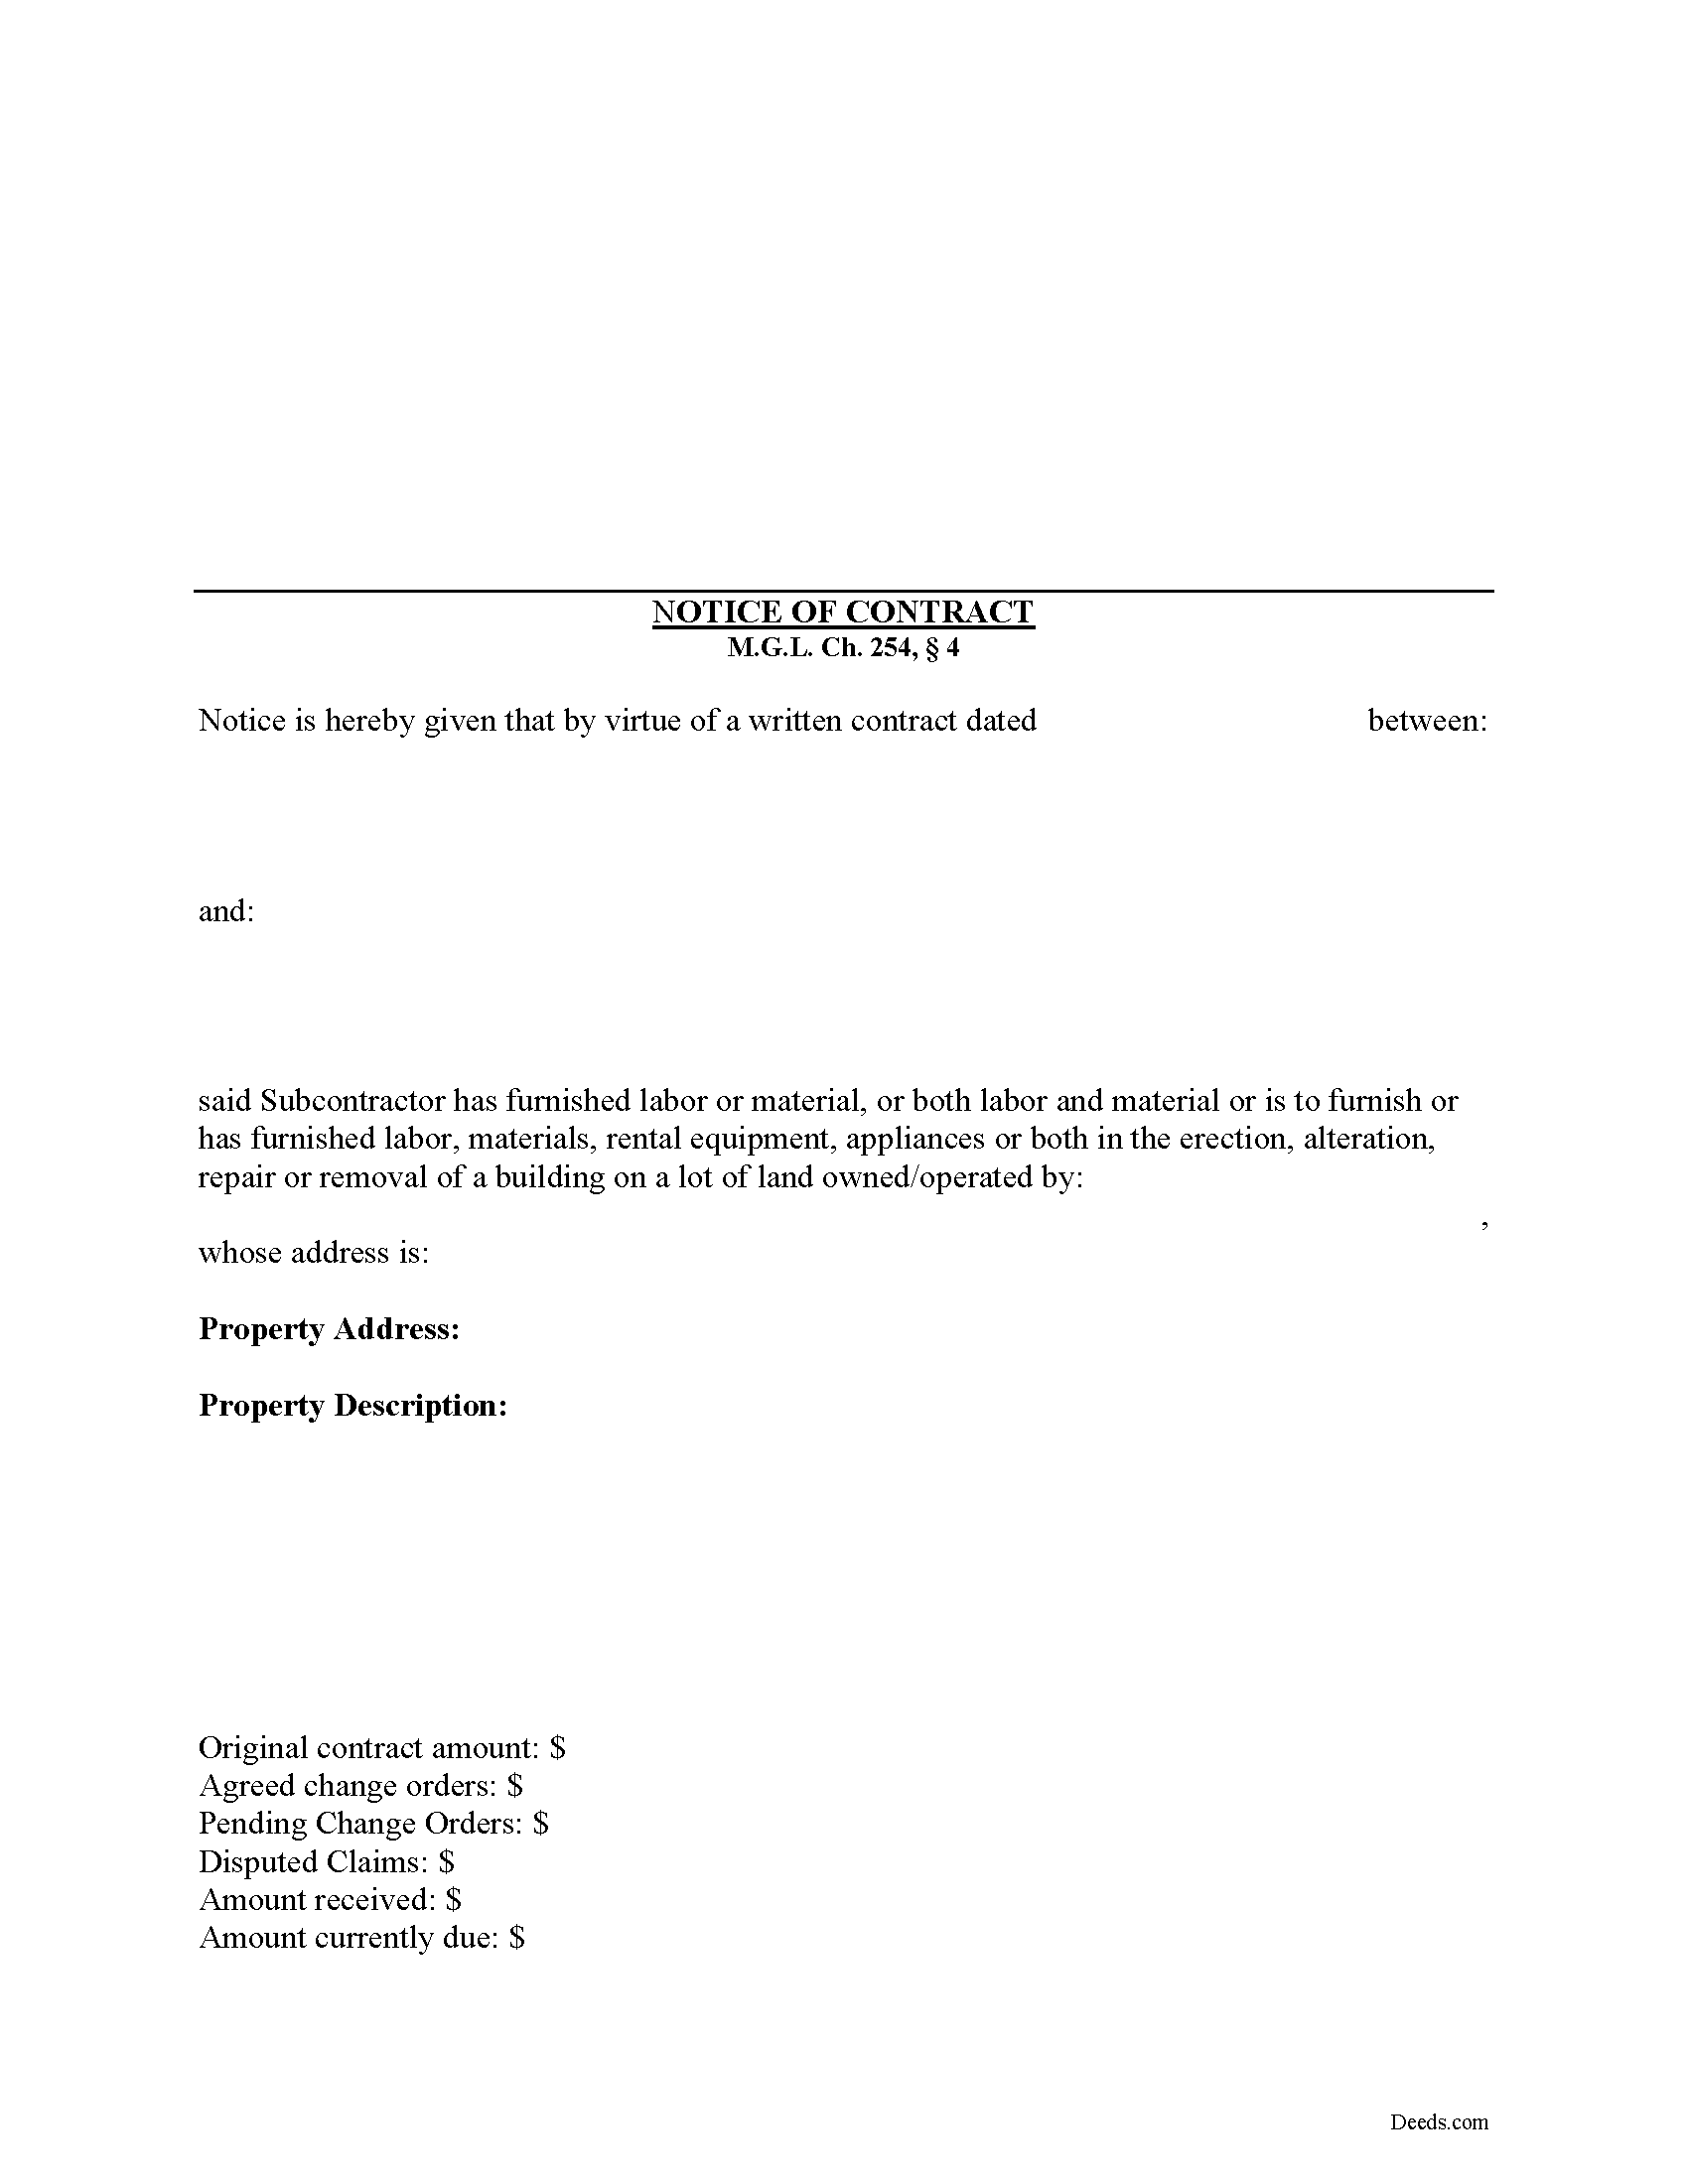 Notice of Contract